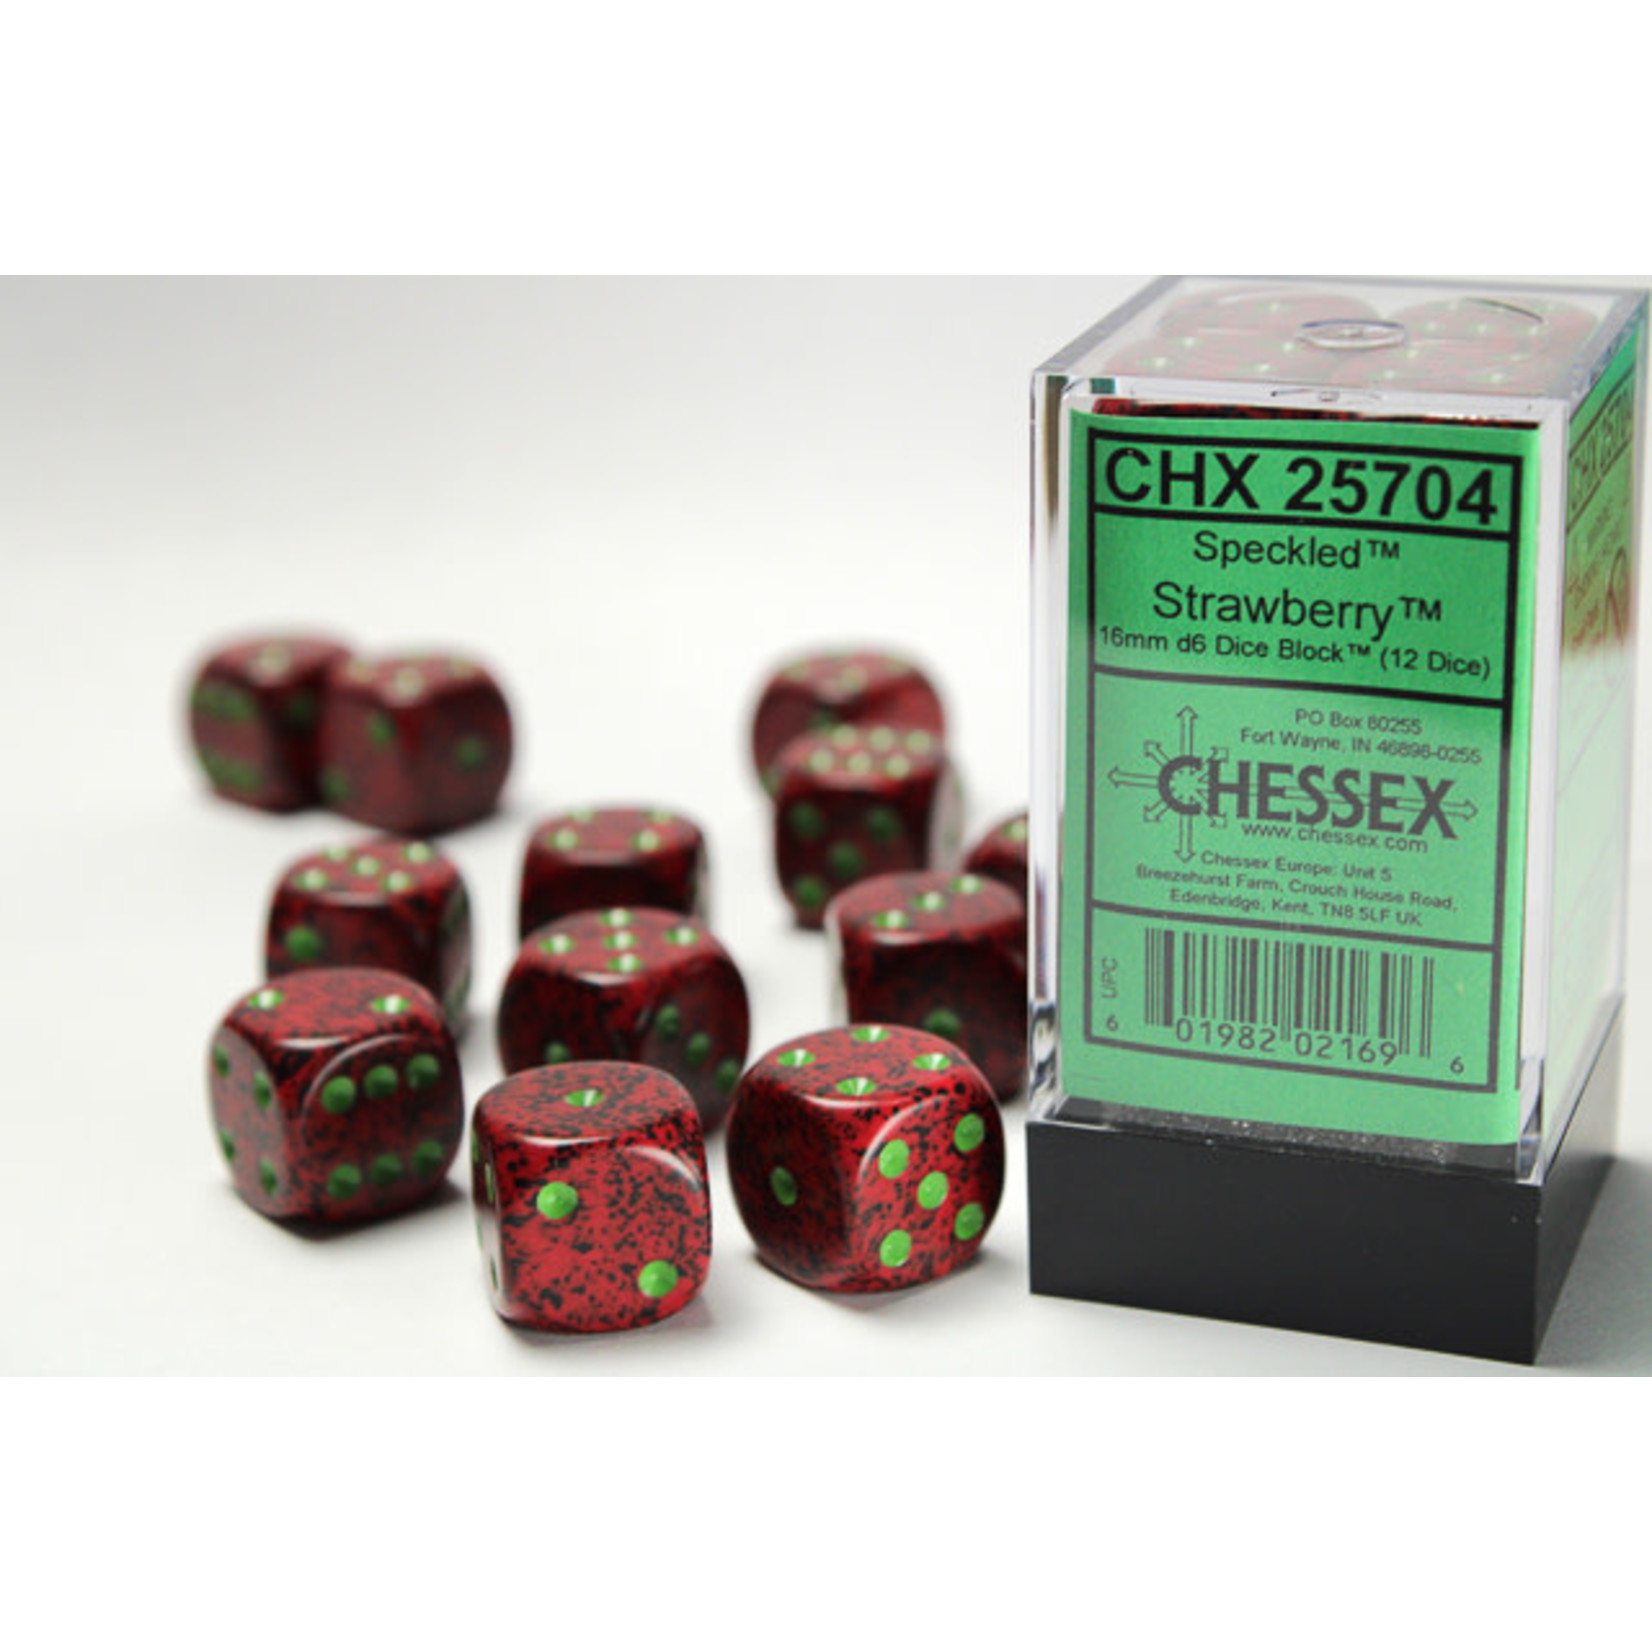 Chessex Dice 16mm 25704 12pc Speckled  Strawberry